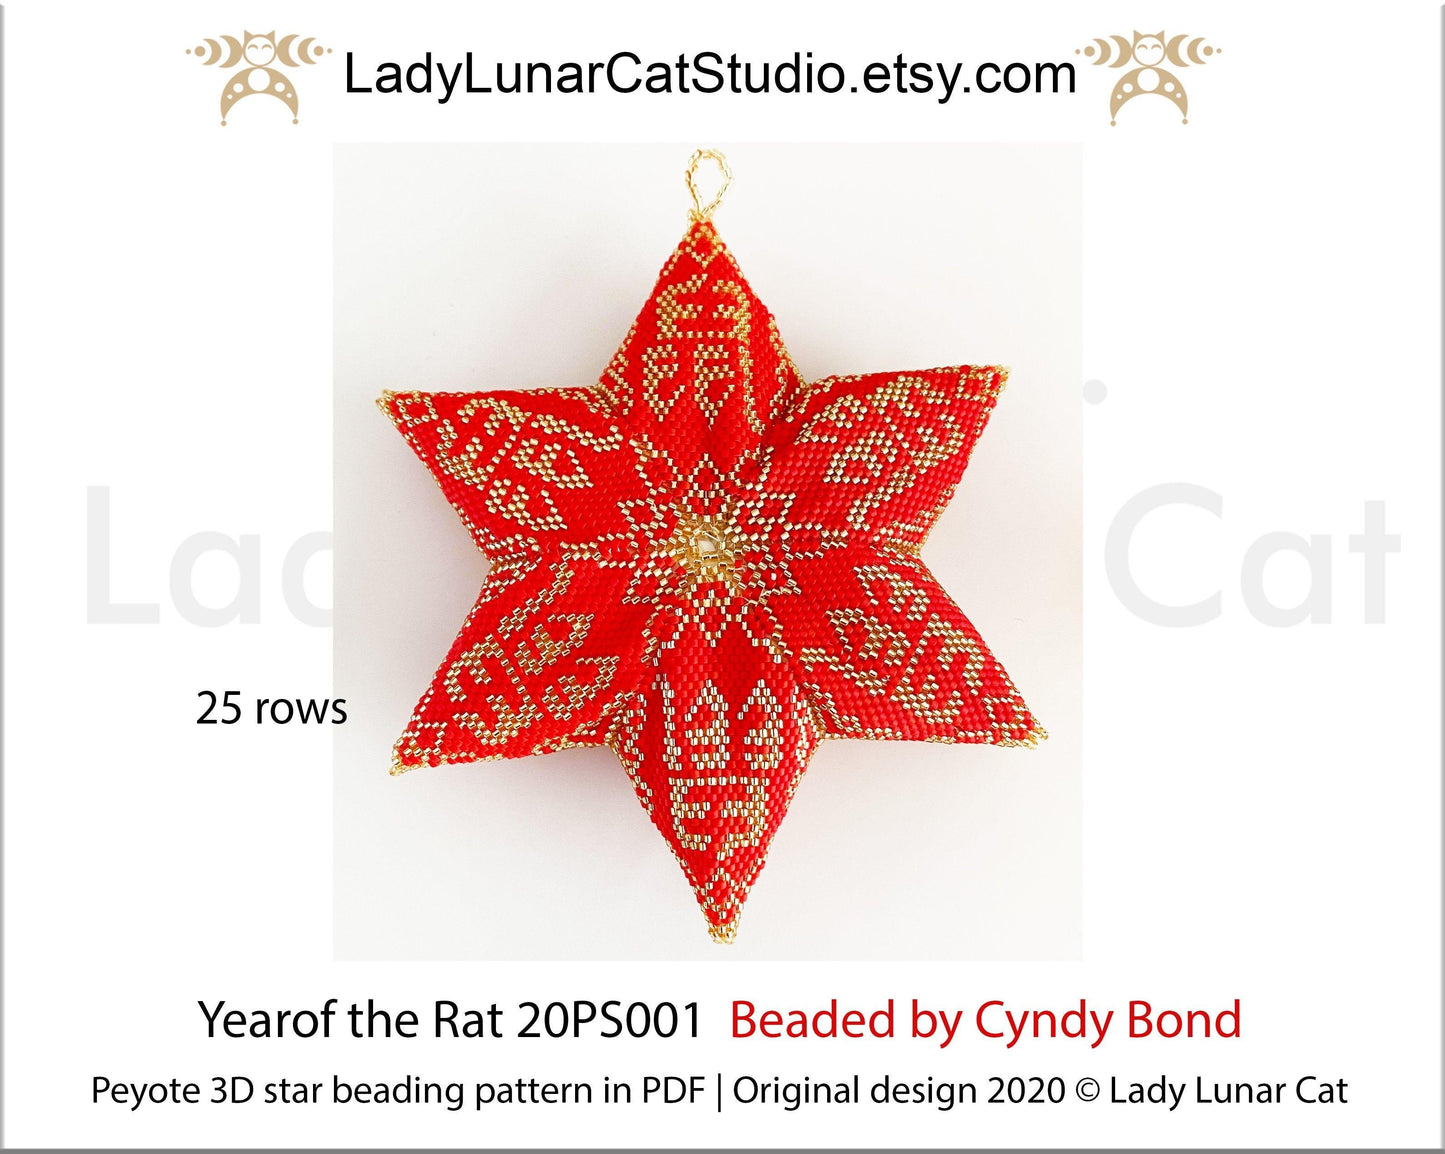 Beaded star pattern for beadweaving Year of the rat 20PS001 LadyLunarCat